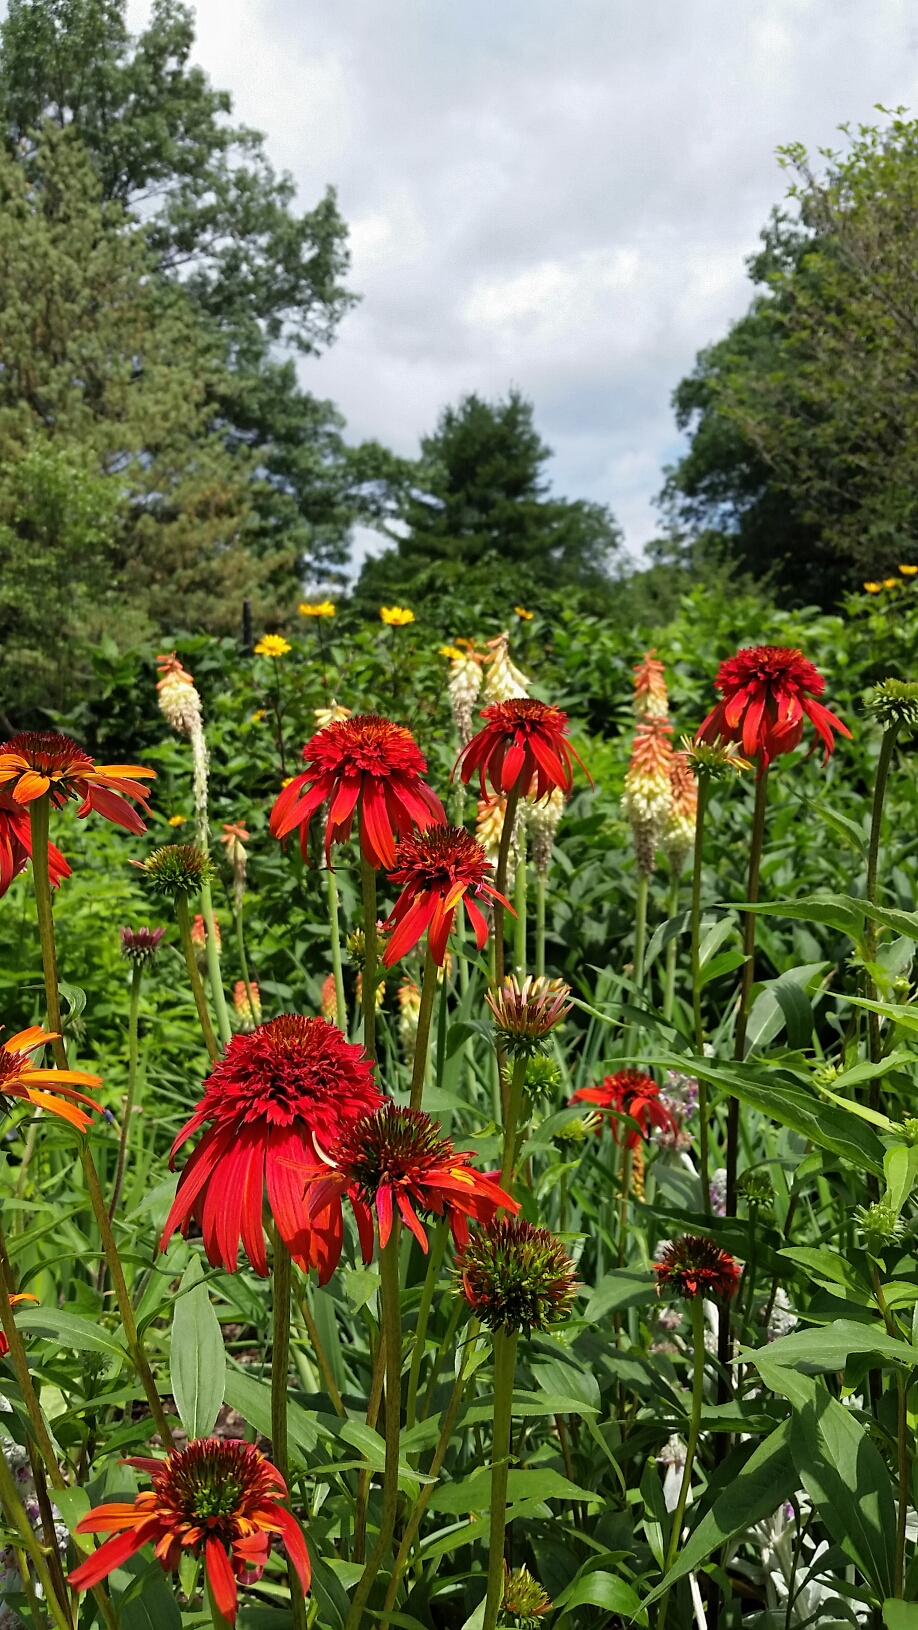 Tall red flowers at the arboretum